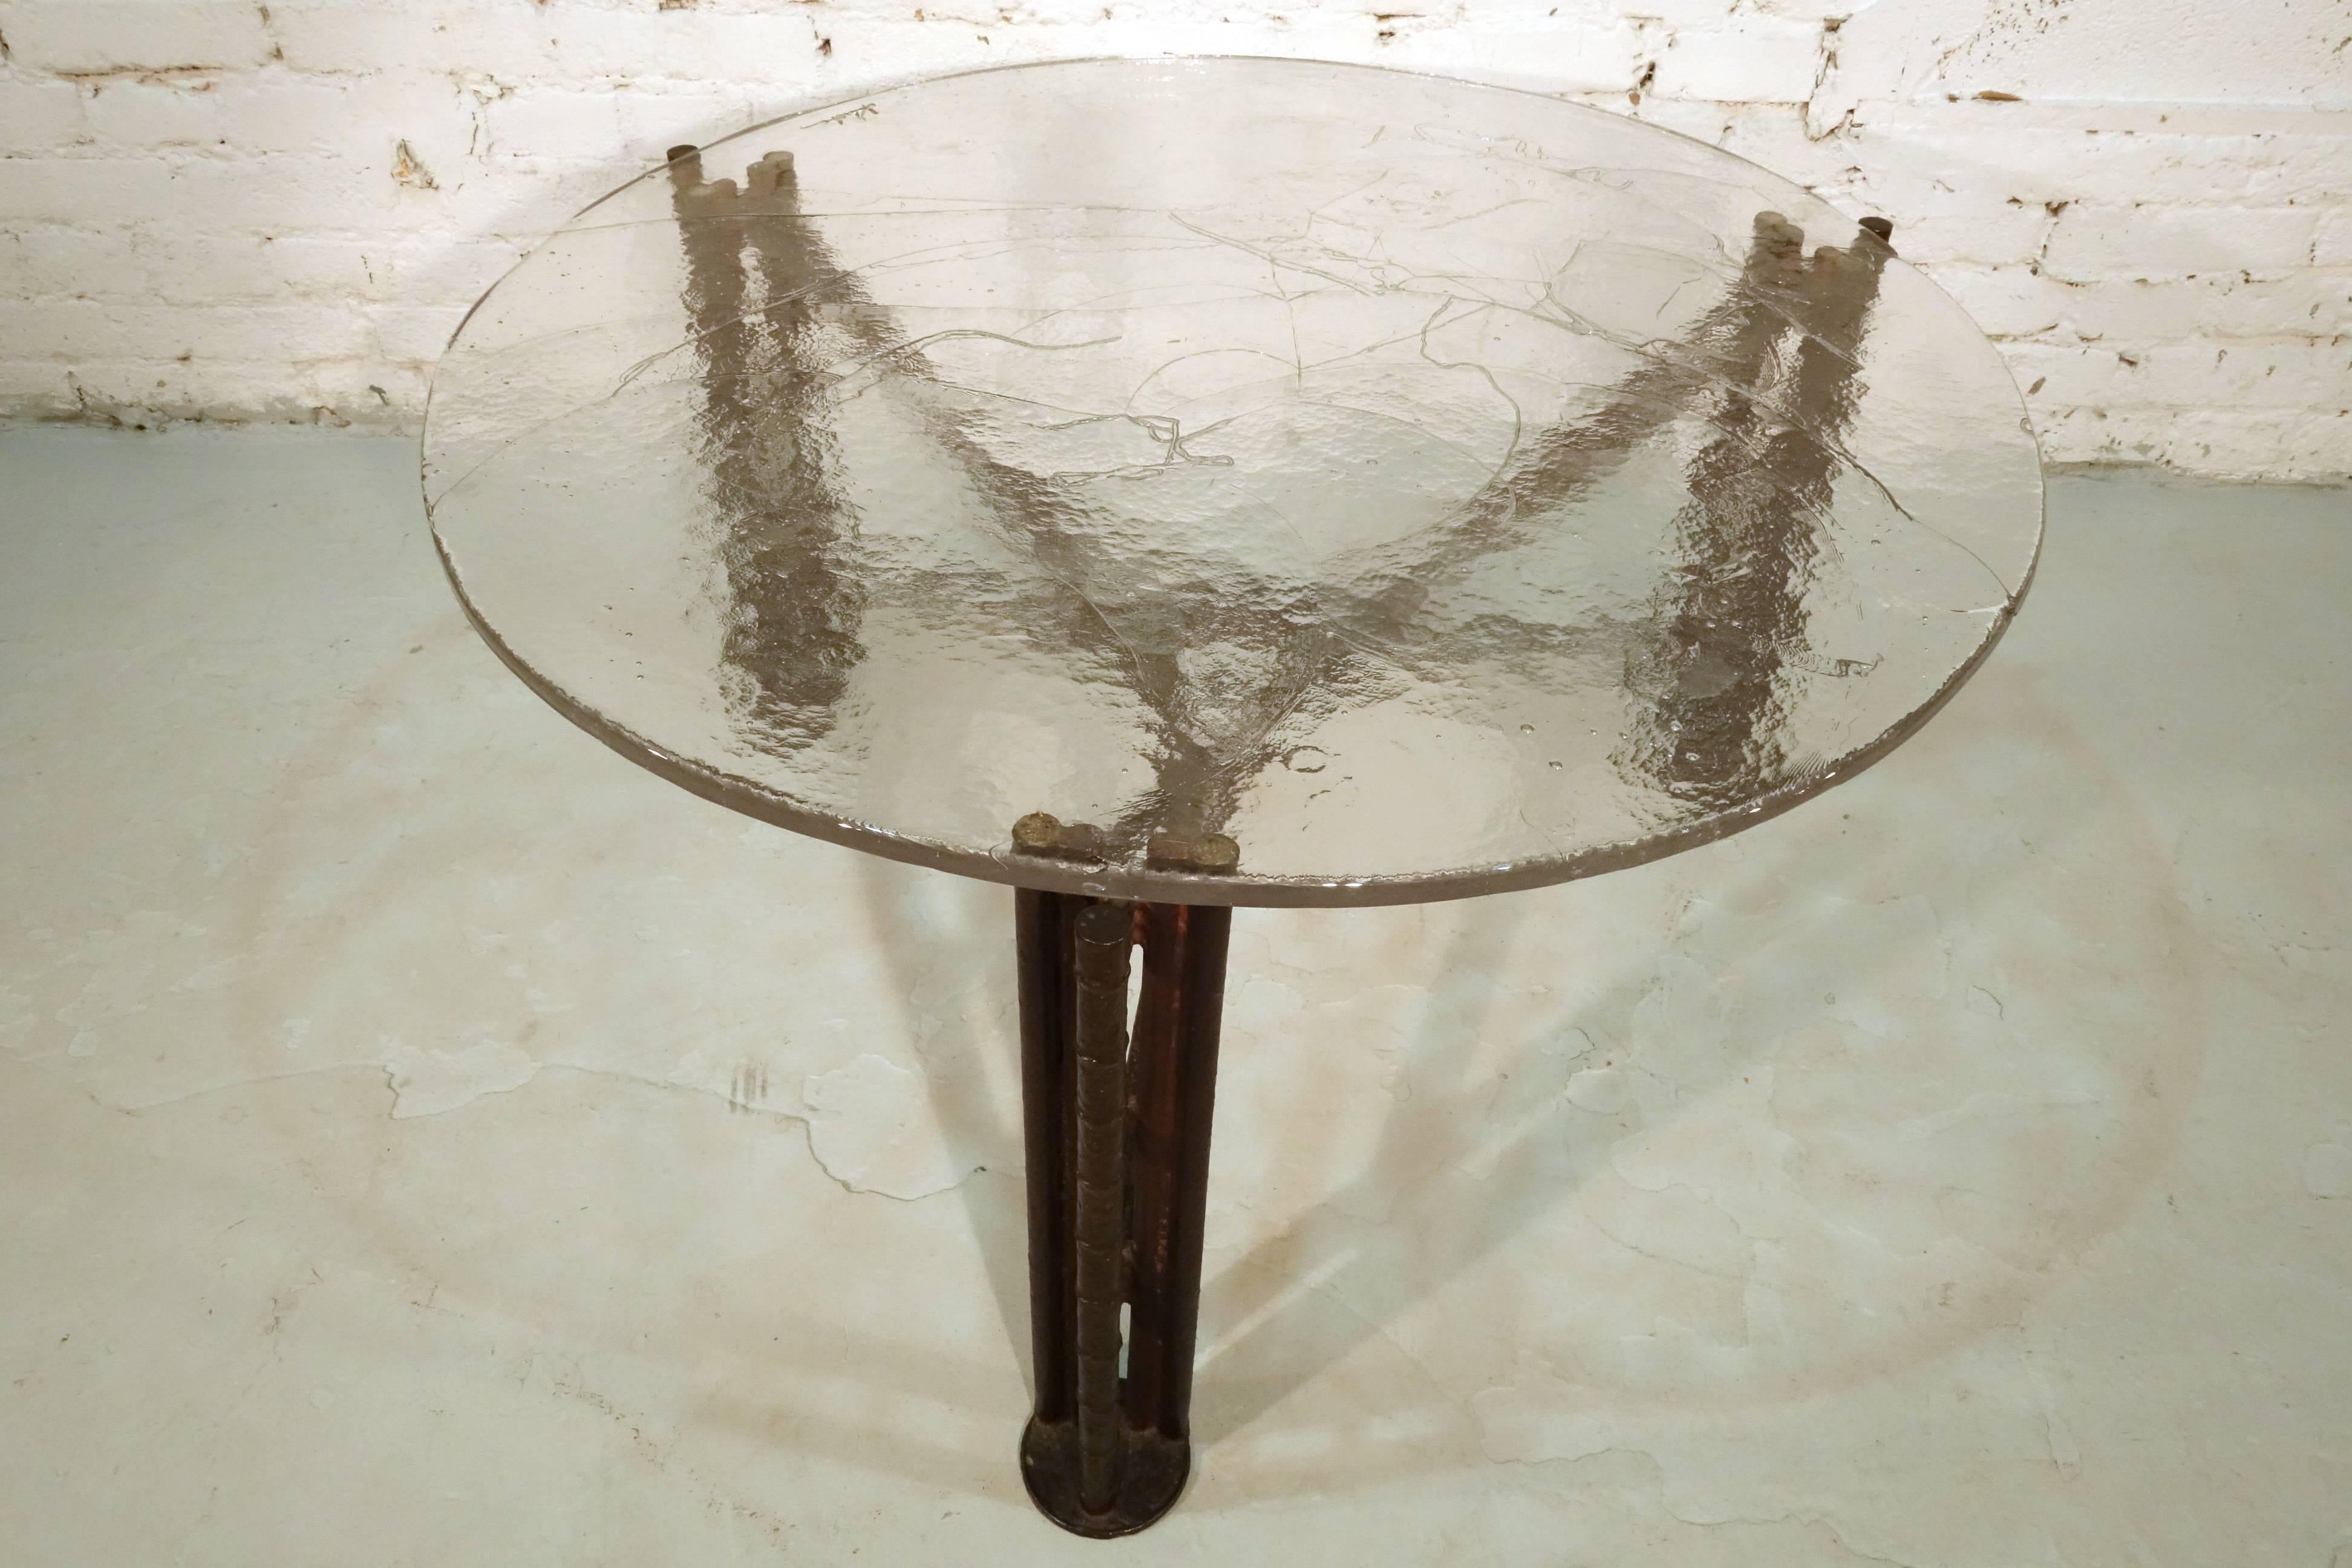 A bronze and glass low table by Lothar Klute

The bronze tripod showing elements of both the brutalist style as well as the influence of Claude Lalanne. The signed glass top fitted in between the leg posts.